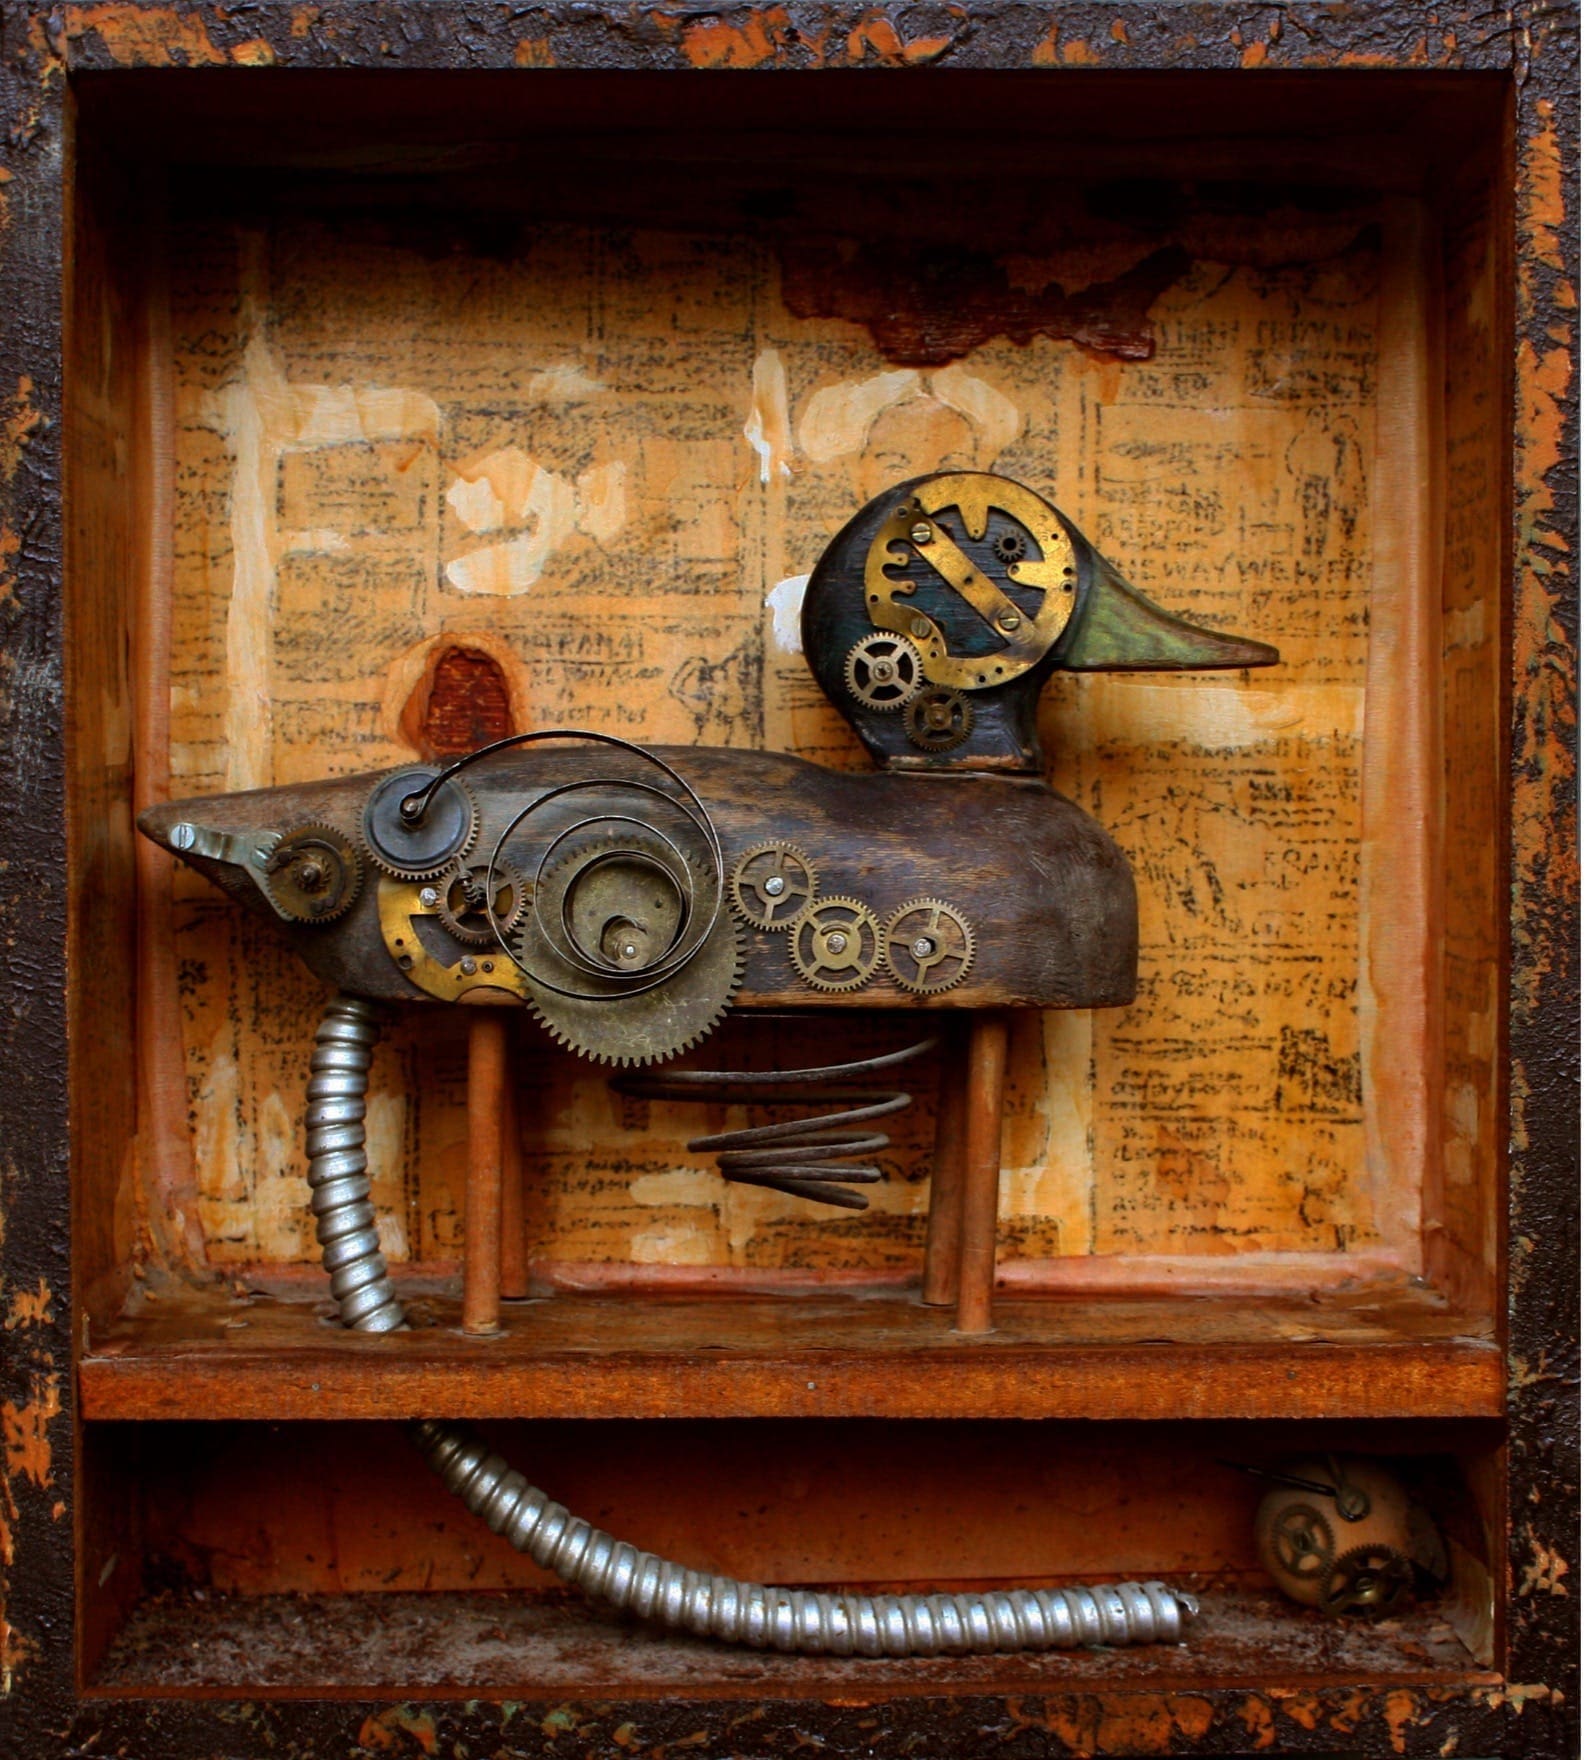 QUACK-IN-THE-BOX-1974-mixed-media-assemblage-by-Terry-Graff